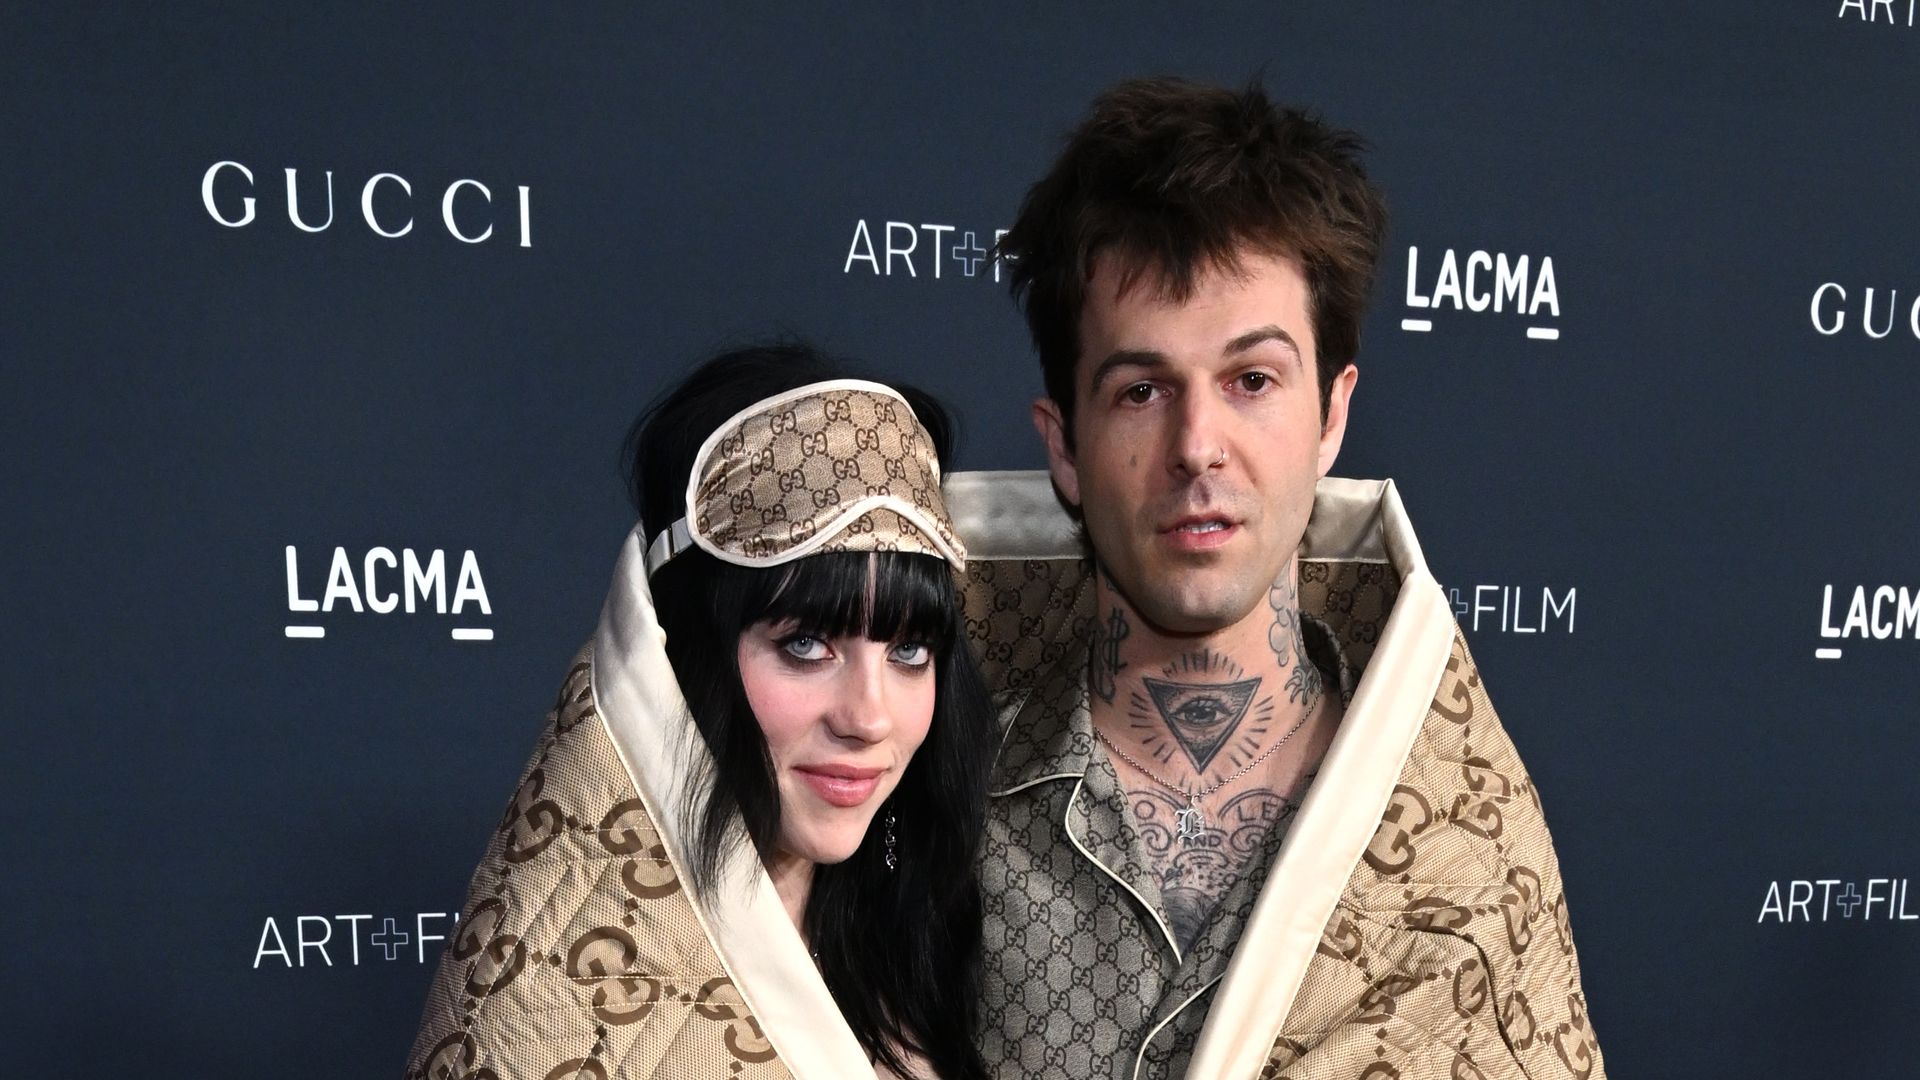 Billie Eilish and Jesse Rutherford, both wearing Gucci, attend the 2022 LACMA ART+FILM GALA Presented By Gucci